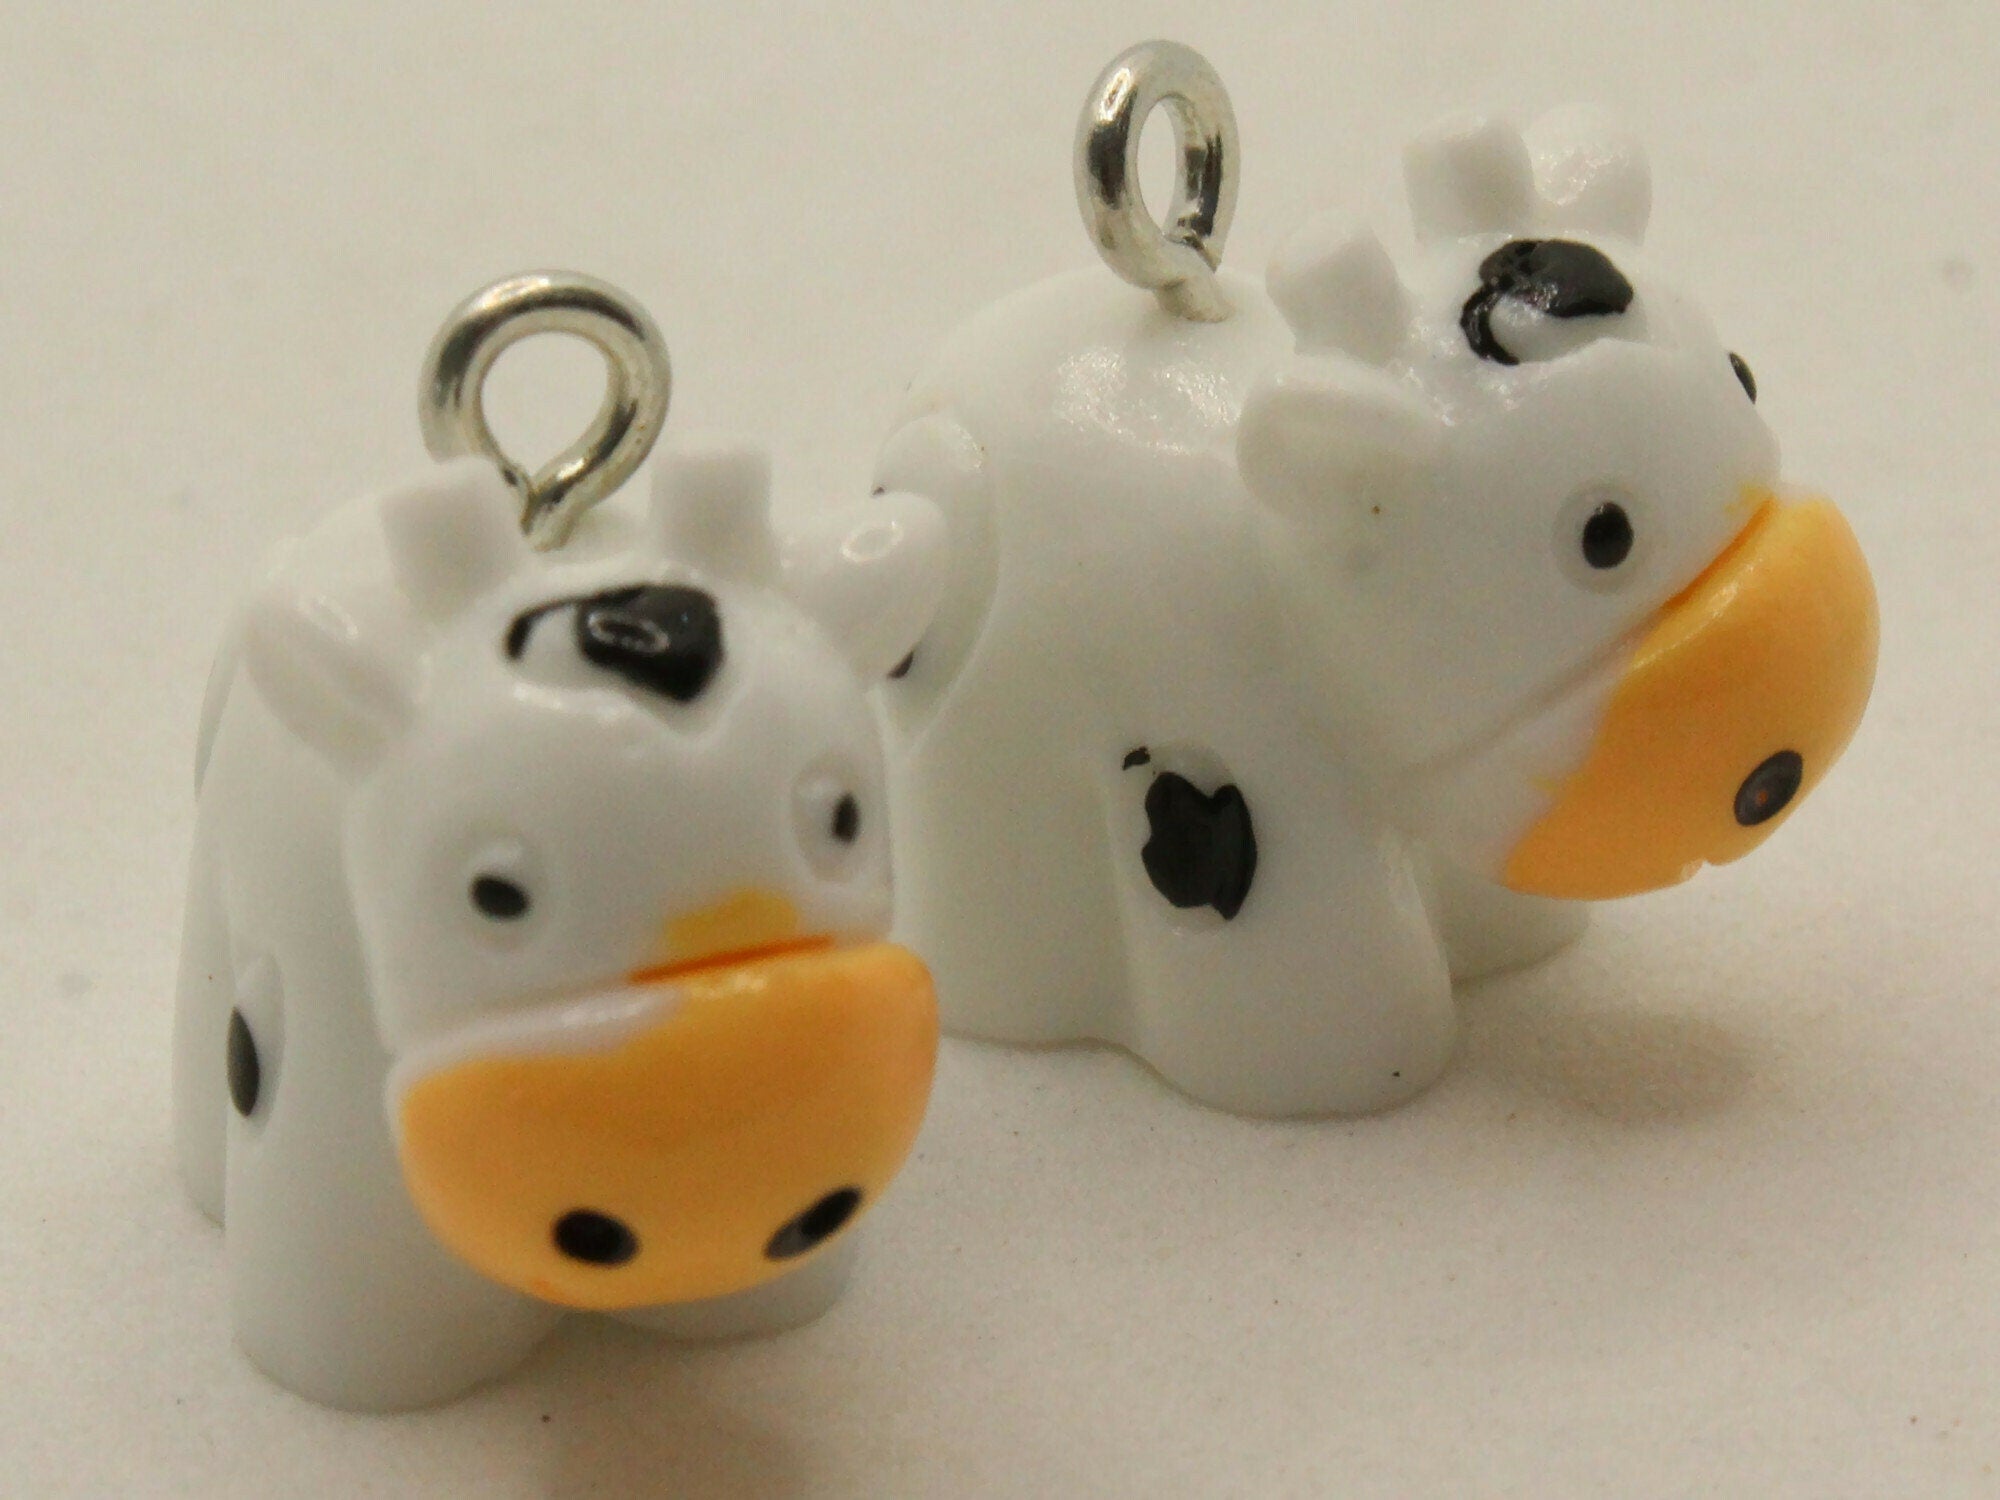 2 16mm Black and White Resin Cow Charms by Smileyboy Beads | Michaels